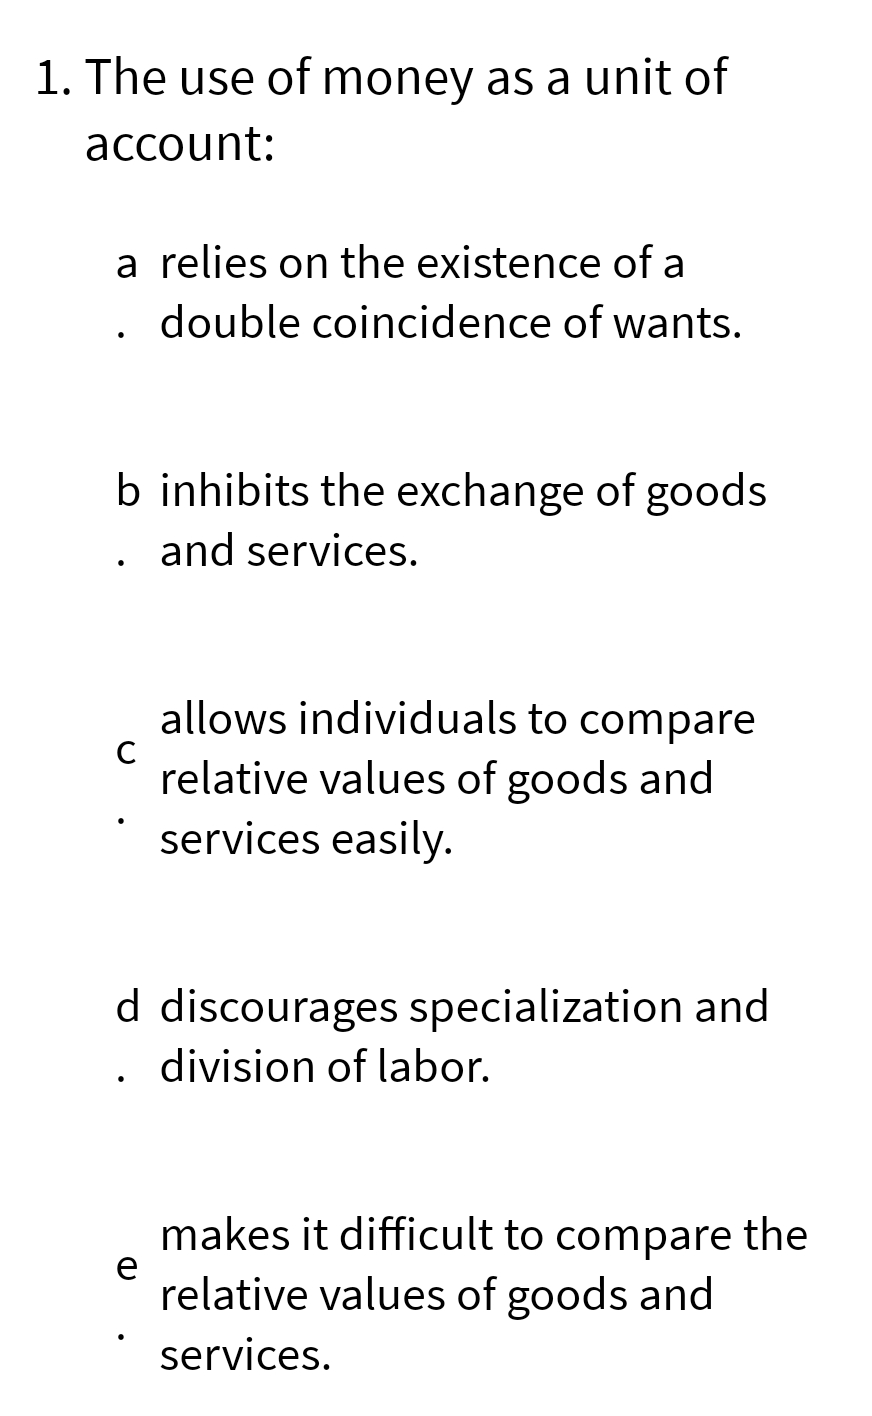 1. The use of money as a unit of
account:
a relies on the existence of a
double coincidence of wants.
b inhibits the exchange of goods
. and services.
allows individuals to compare
C relative values of goods and
services easily.
d discourages specialization and
division of labor.
e
makes it difficult to compare the
relative values of goods and
services.